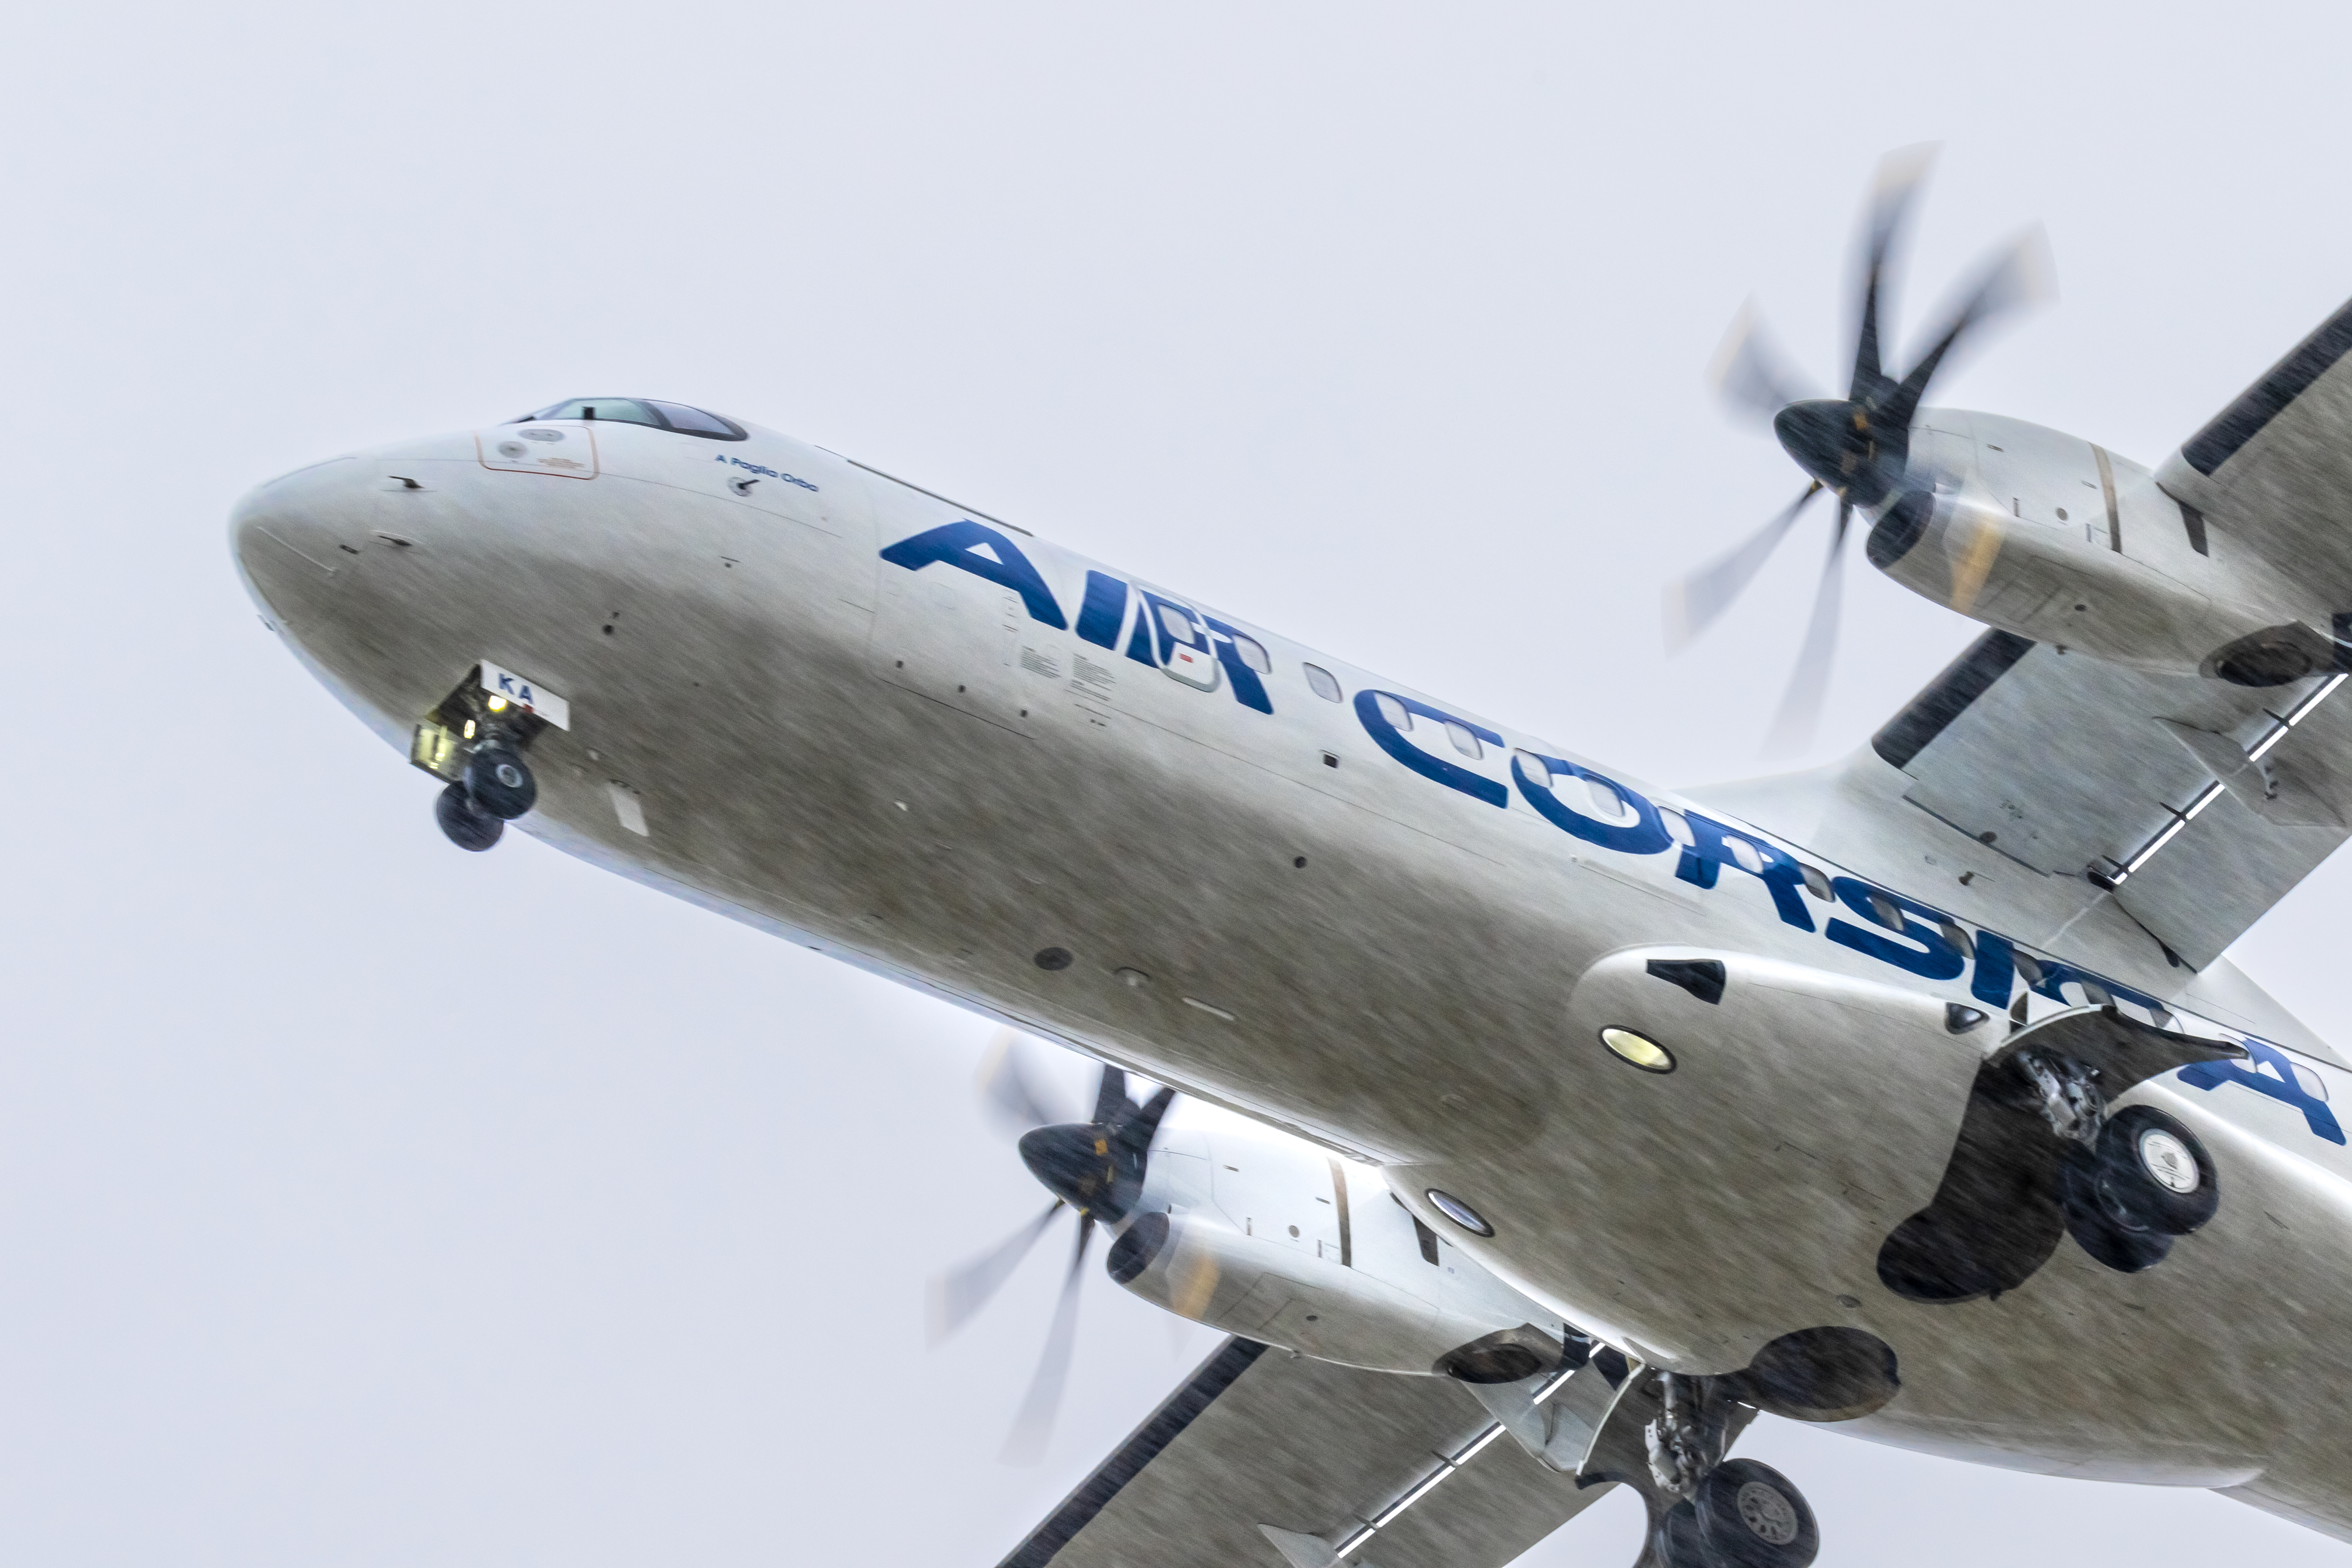 ATR delivers first ATR 72-600 to Air Corsica powered by PW127XT engines